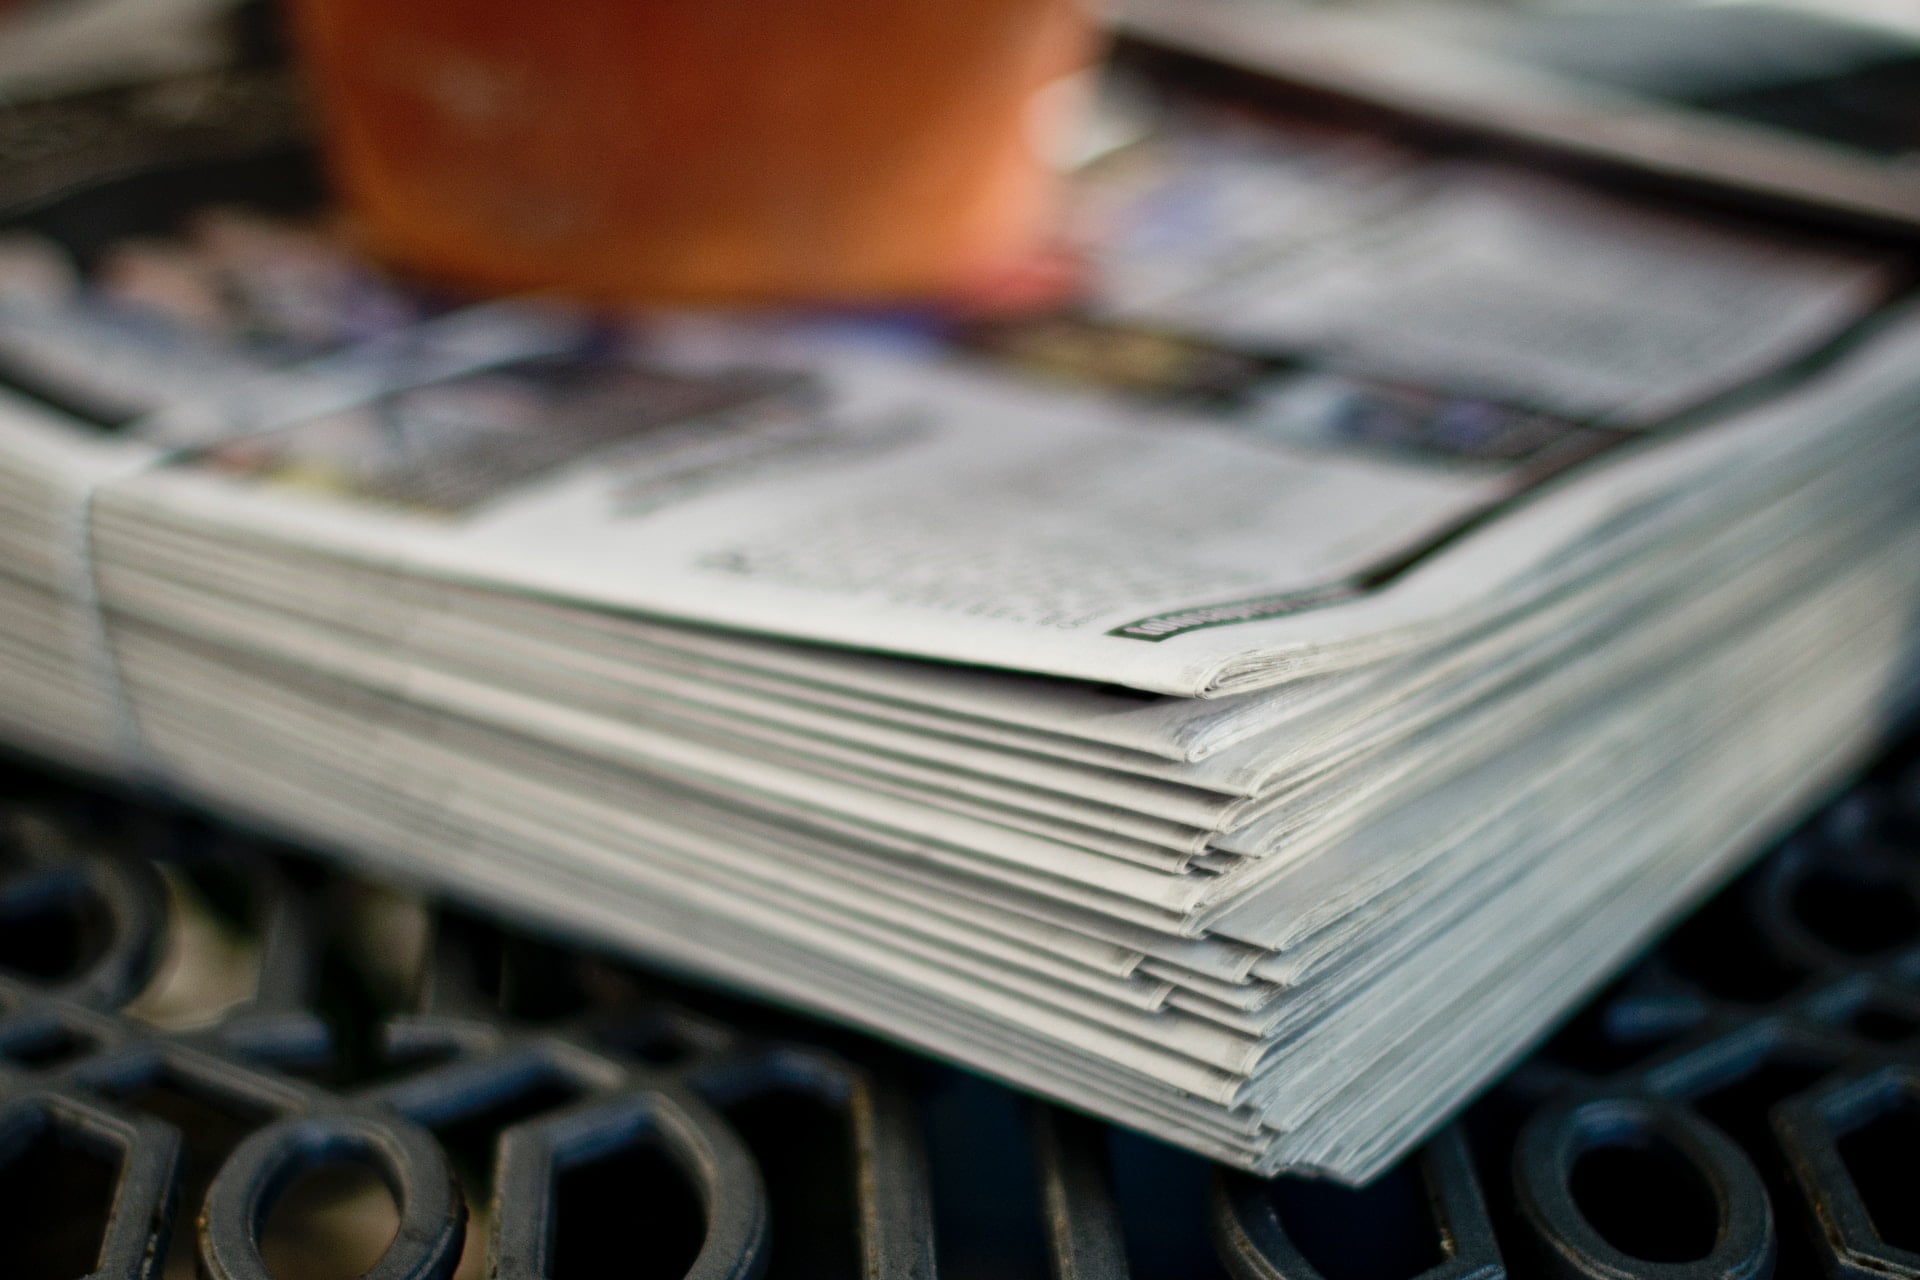 Depicts a pile of newspapers. Used as a cover image for a roundup post about alternative investment news.